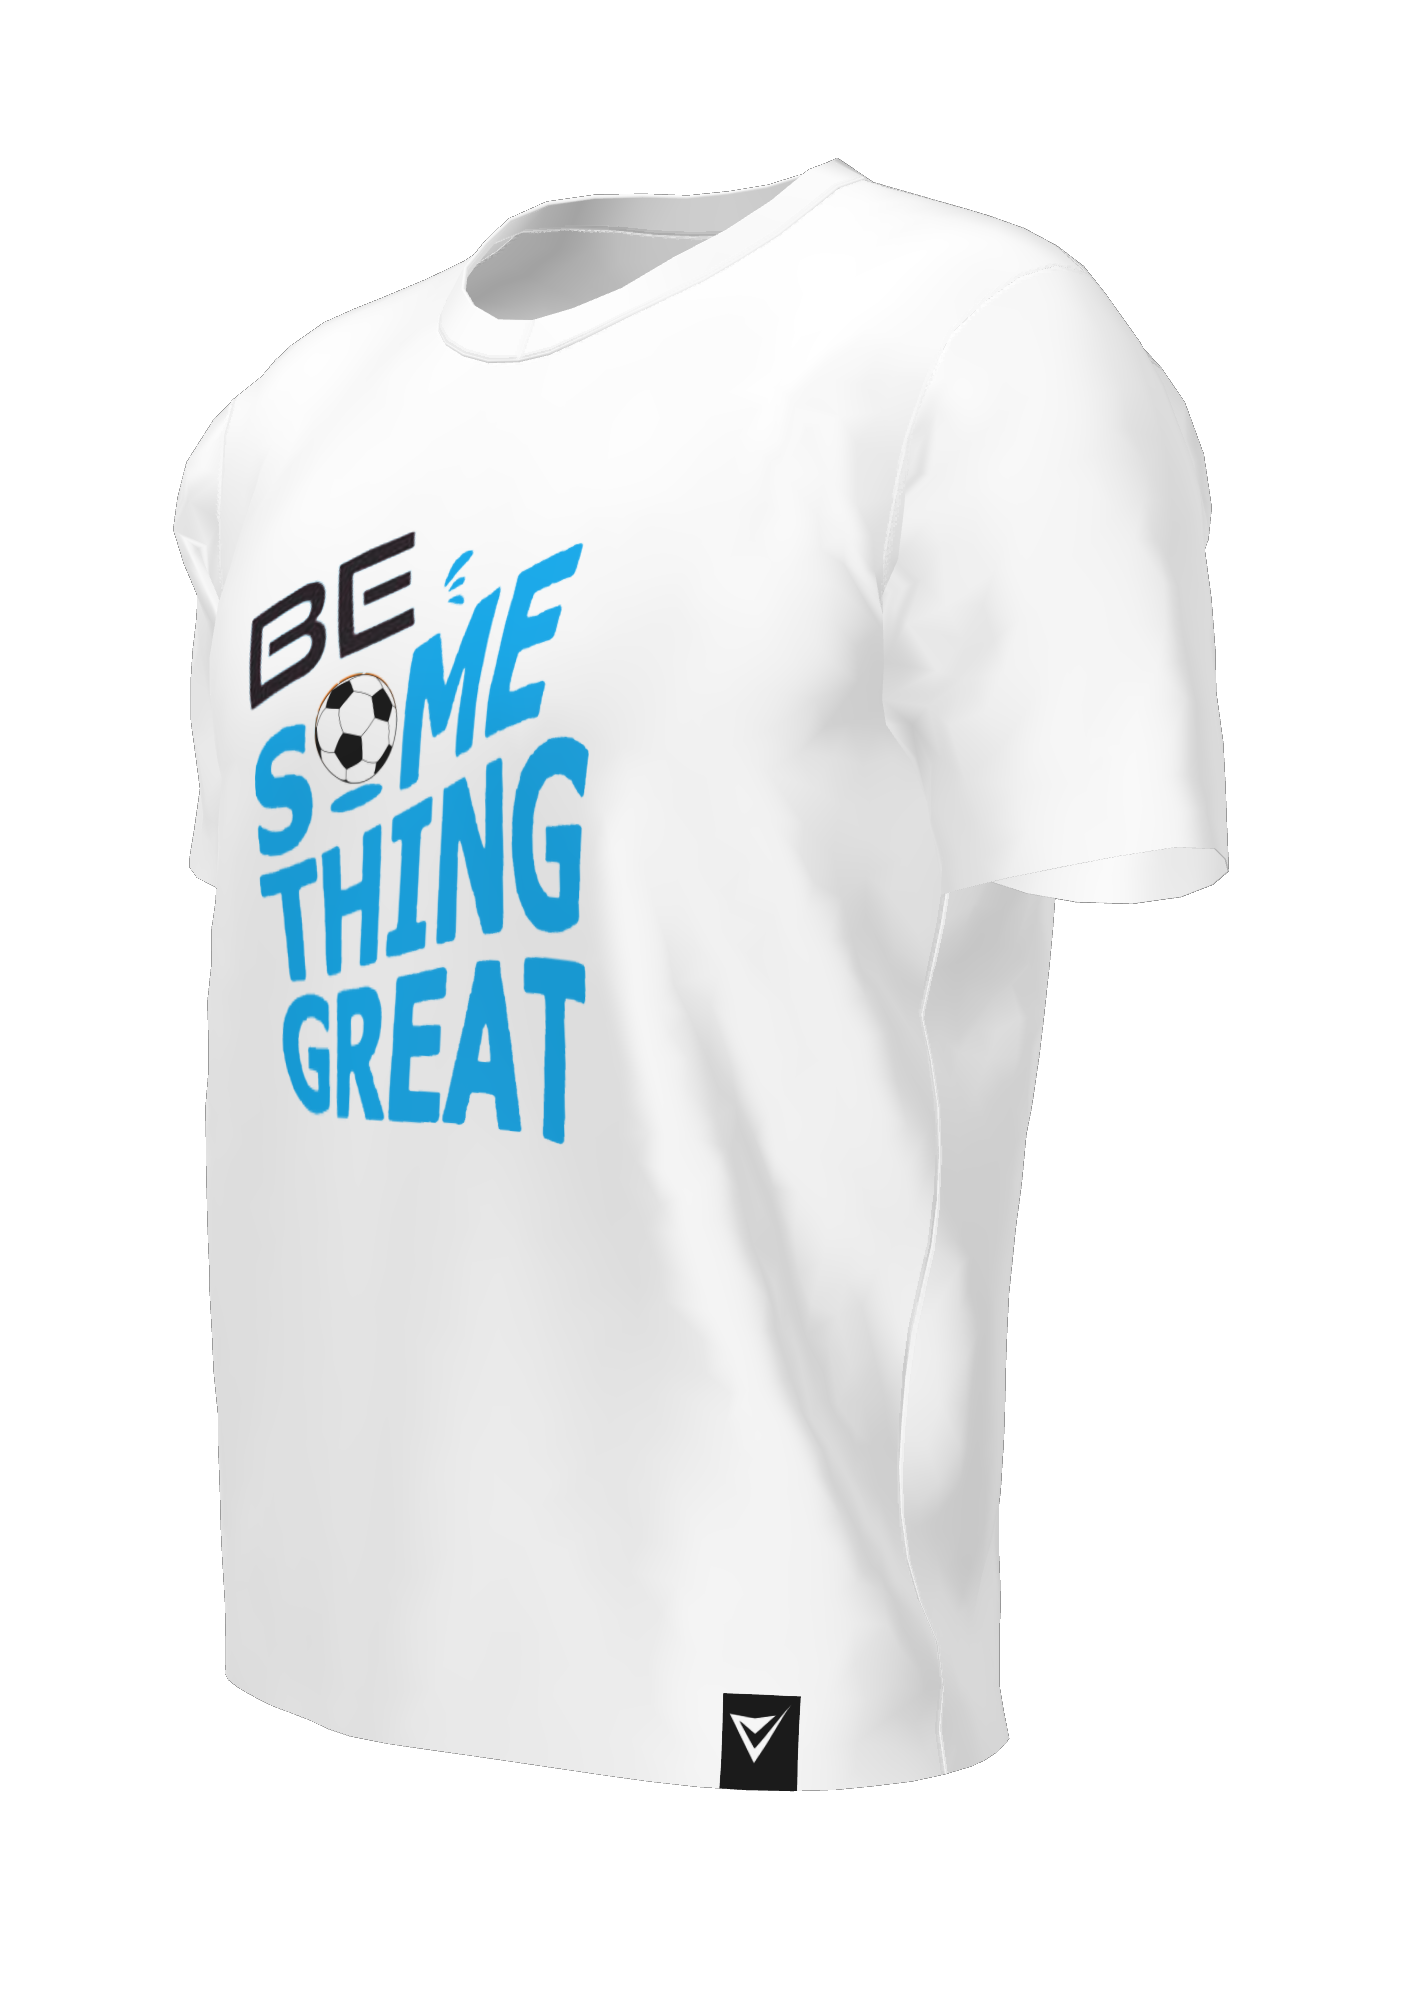 BE Great Soccer - White/Blue